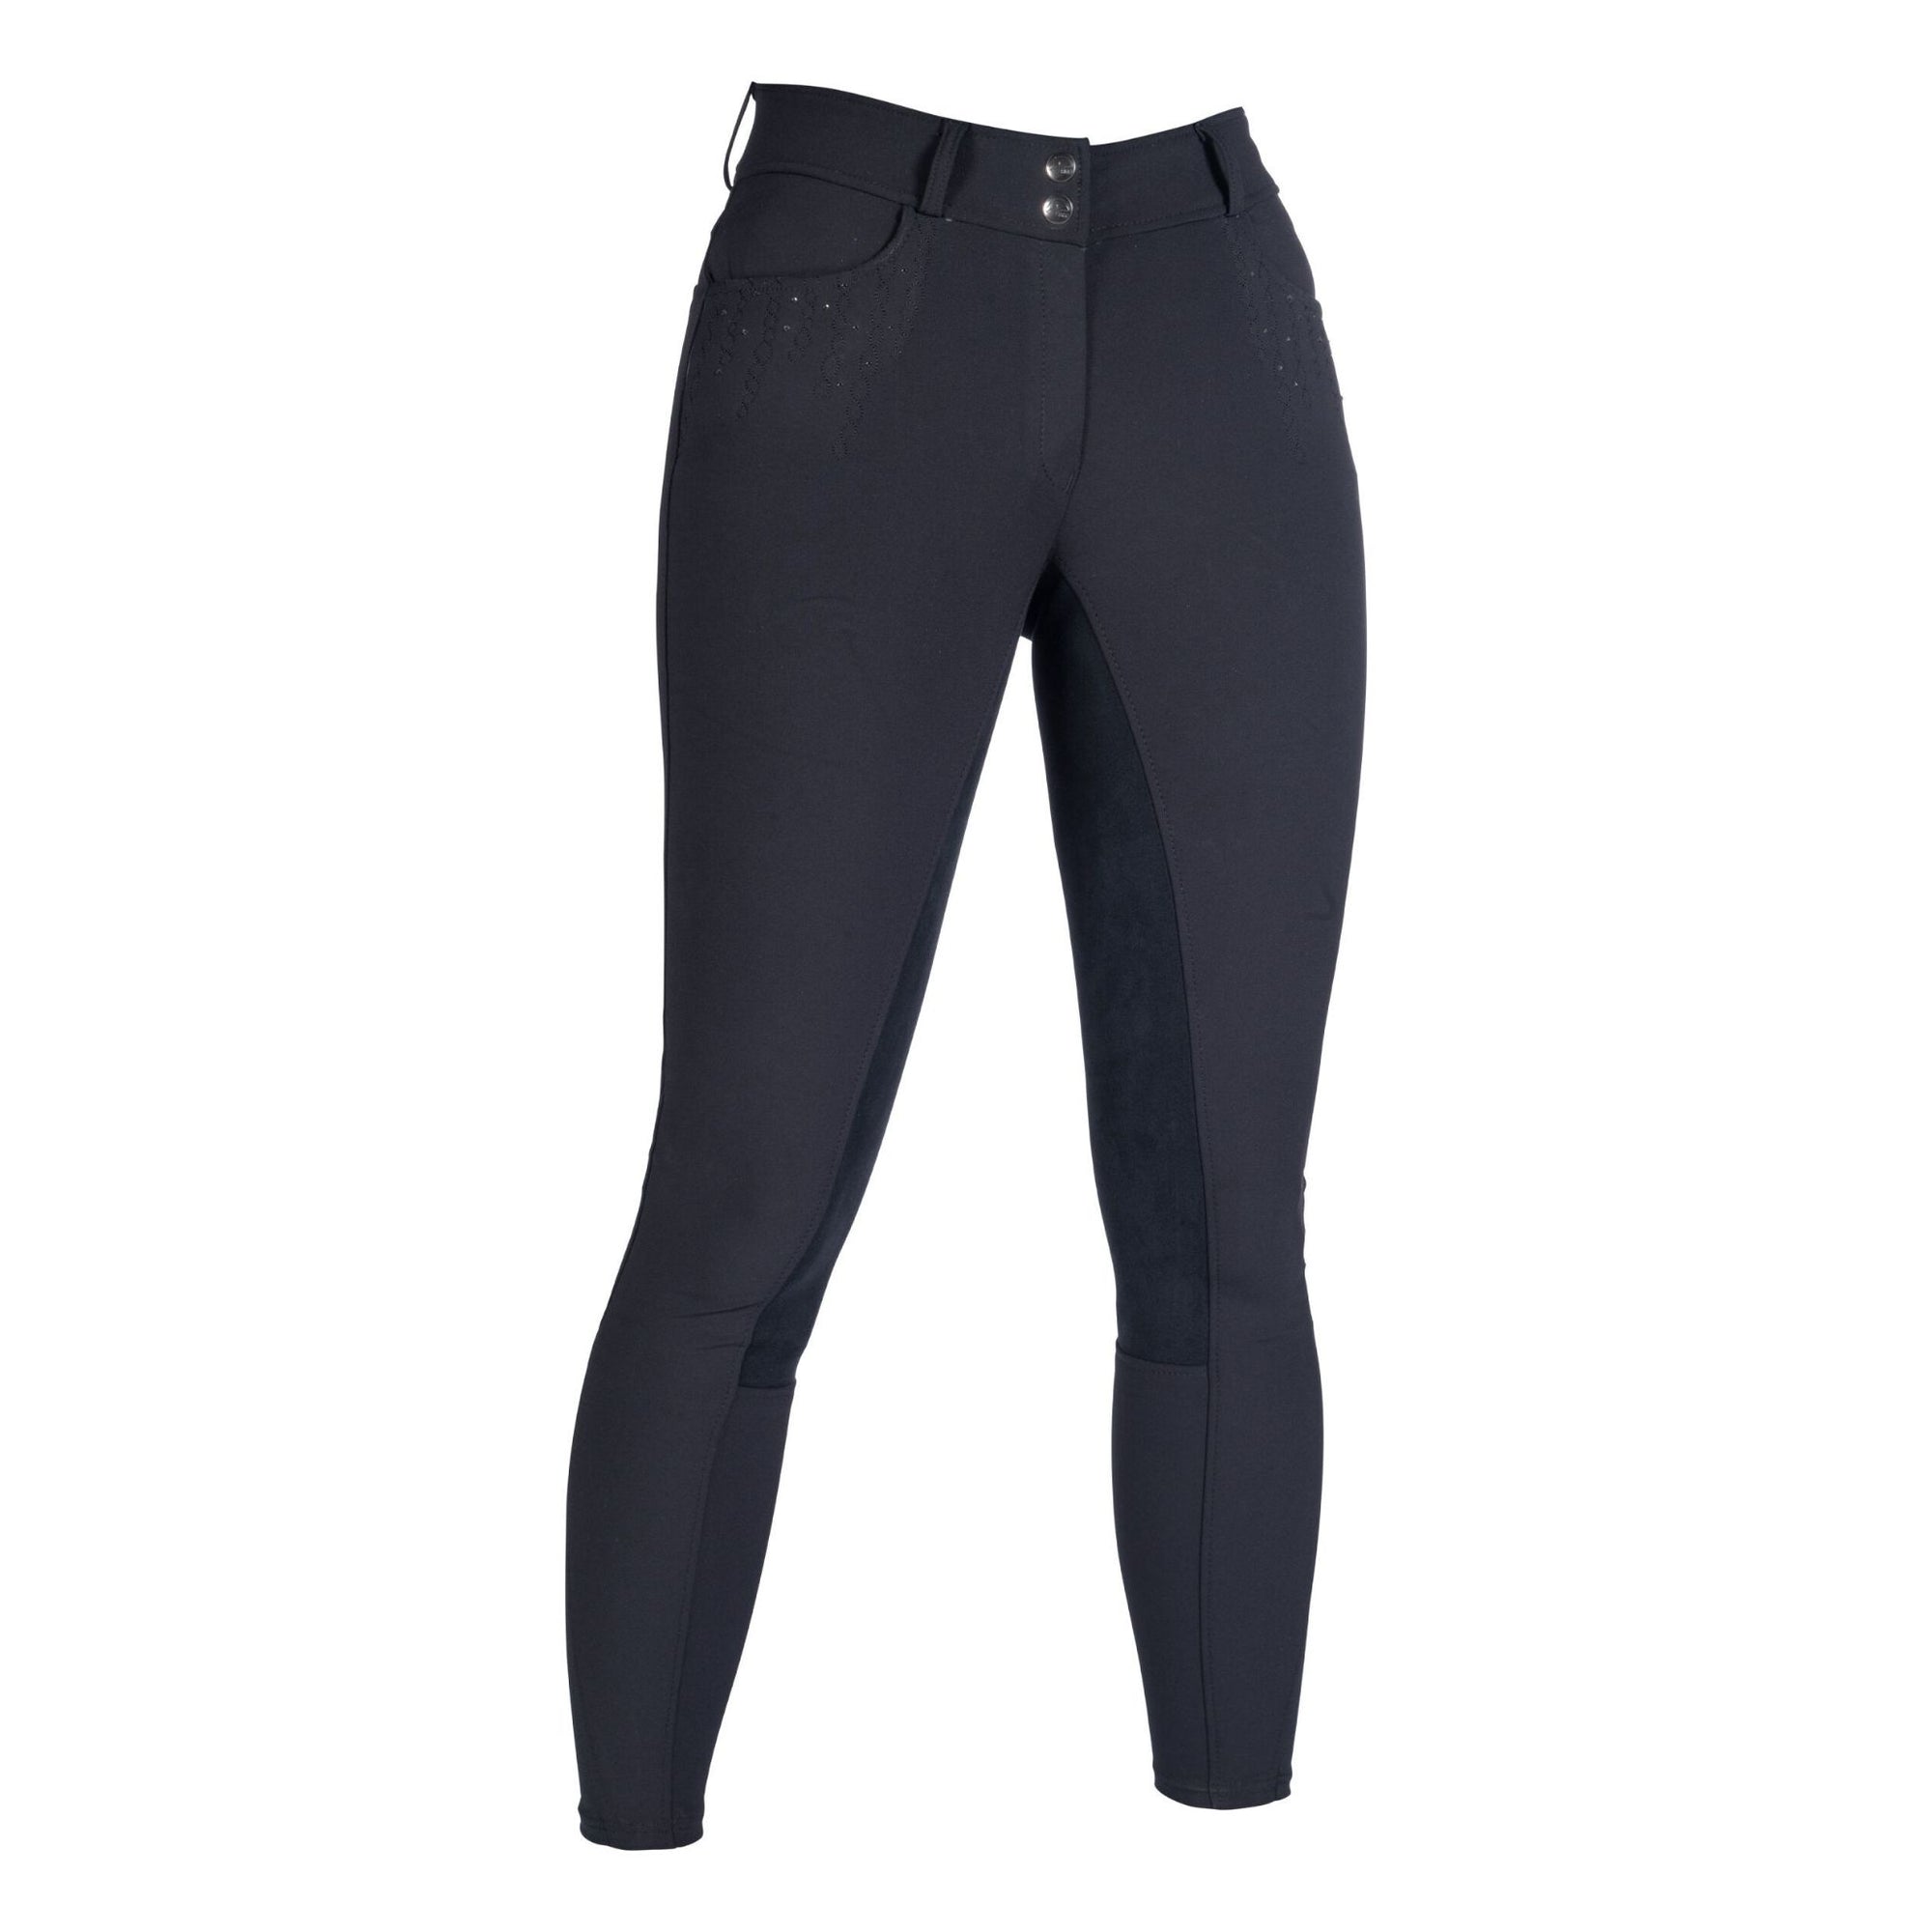 Black suede breeches with crystals on the pockets and a zip and button up waist band.  